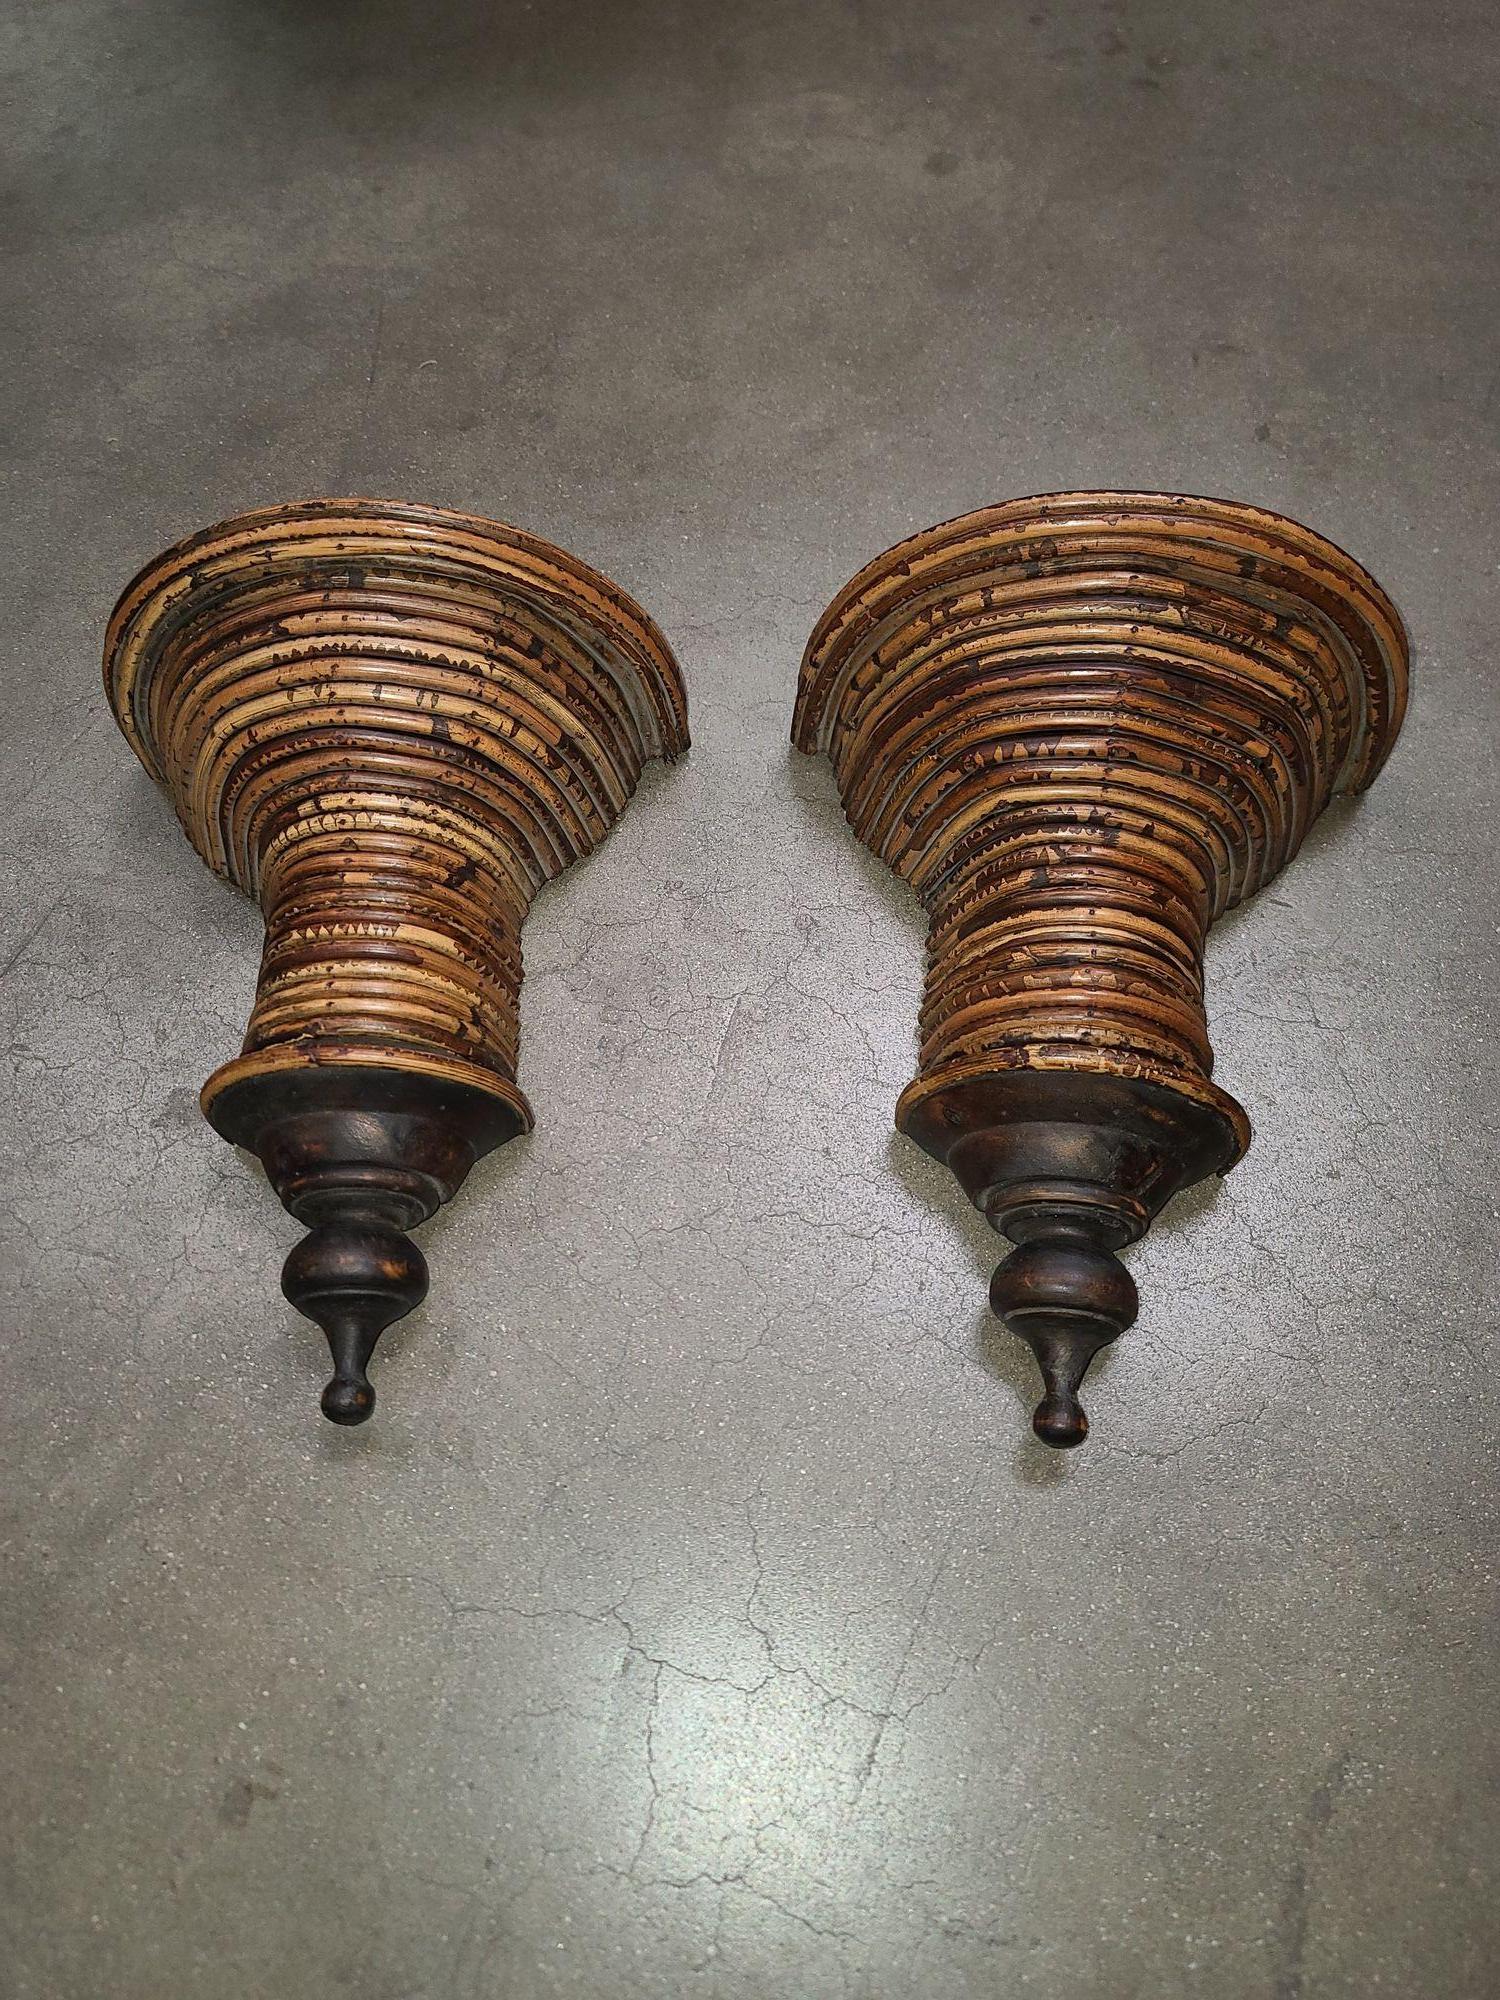 Restored Pencil Reed Rattan Wall Shelf Pedestals, Pair in the style of Crespi In Excellent Condition For Sale In Van Nuys, CA